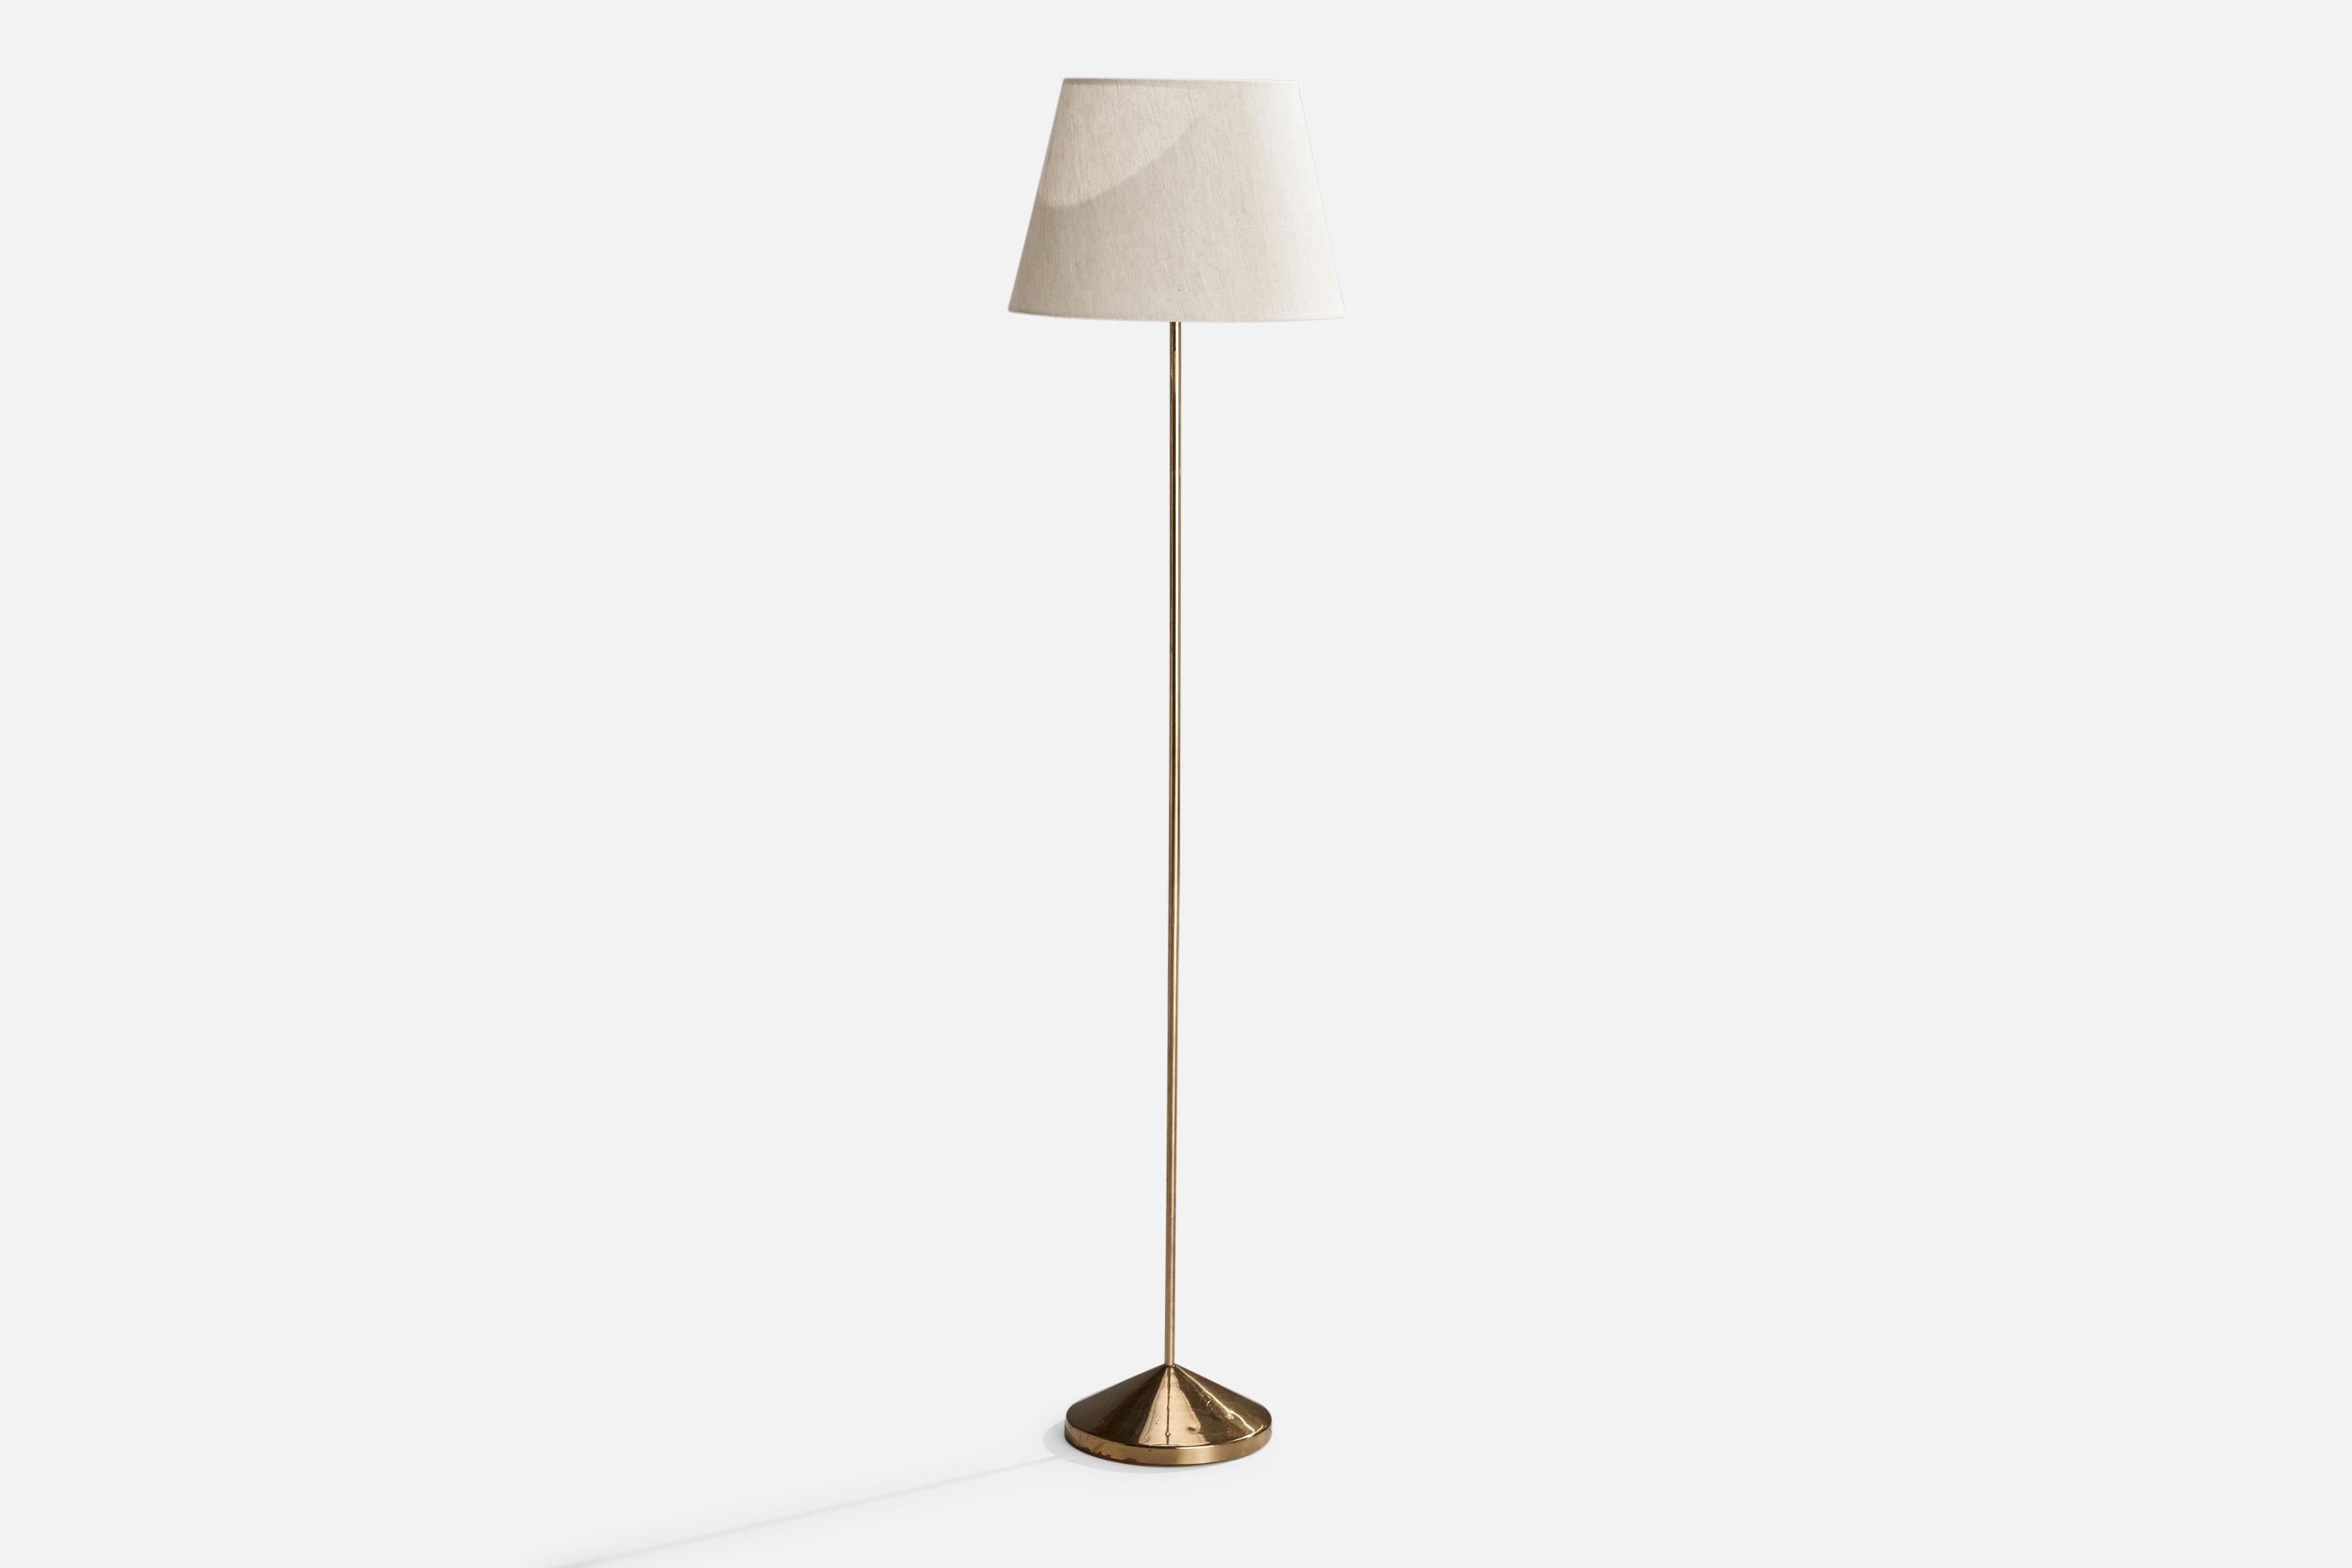 A brass and off-white fabric floor lamp designed and produced in Sweden, c. 1960s.

Overall Dimensions (inches): 58” H x 13.875” W x 14” D
Stated dimensions include shade.
Bulb Specifications: E-26 Bulb
Number of Sockets: 1
All lighting will be